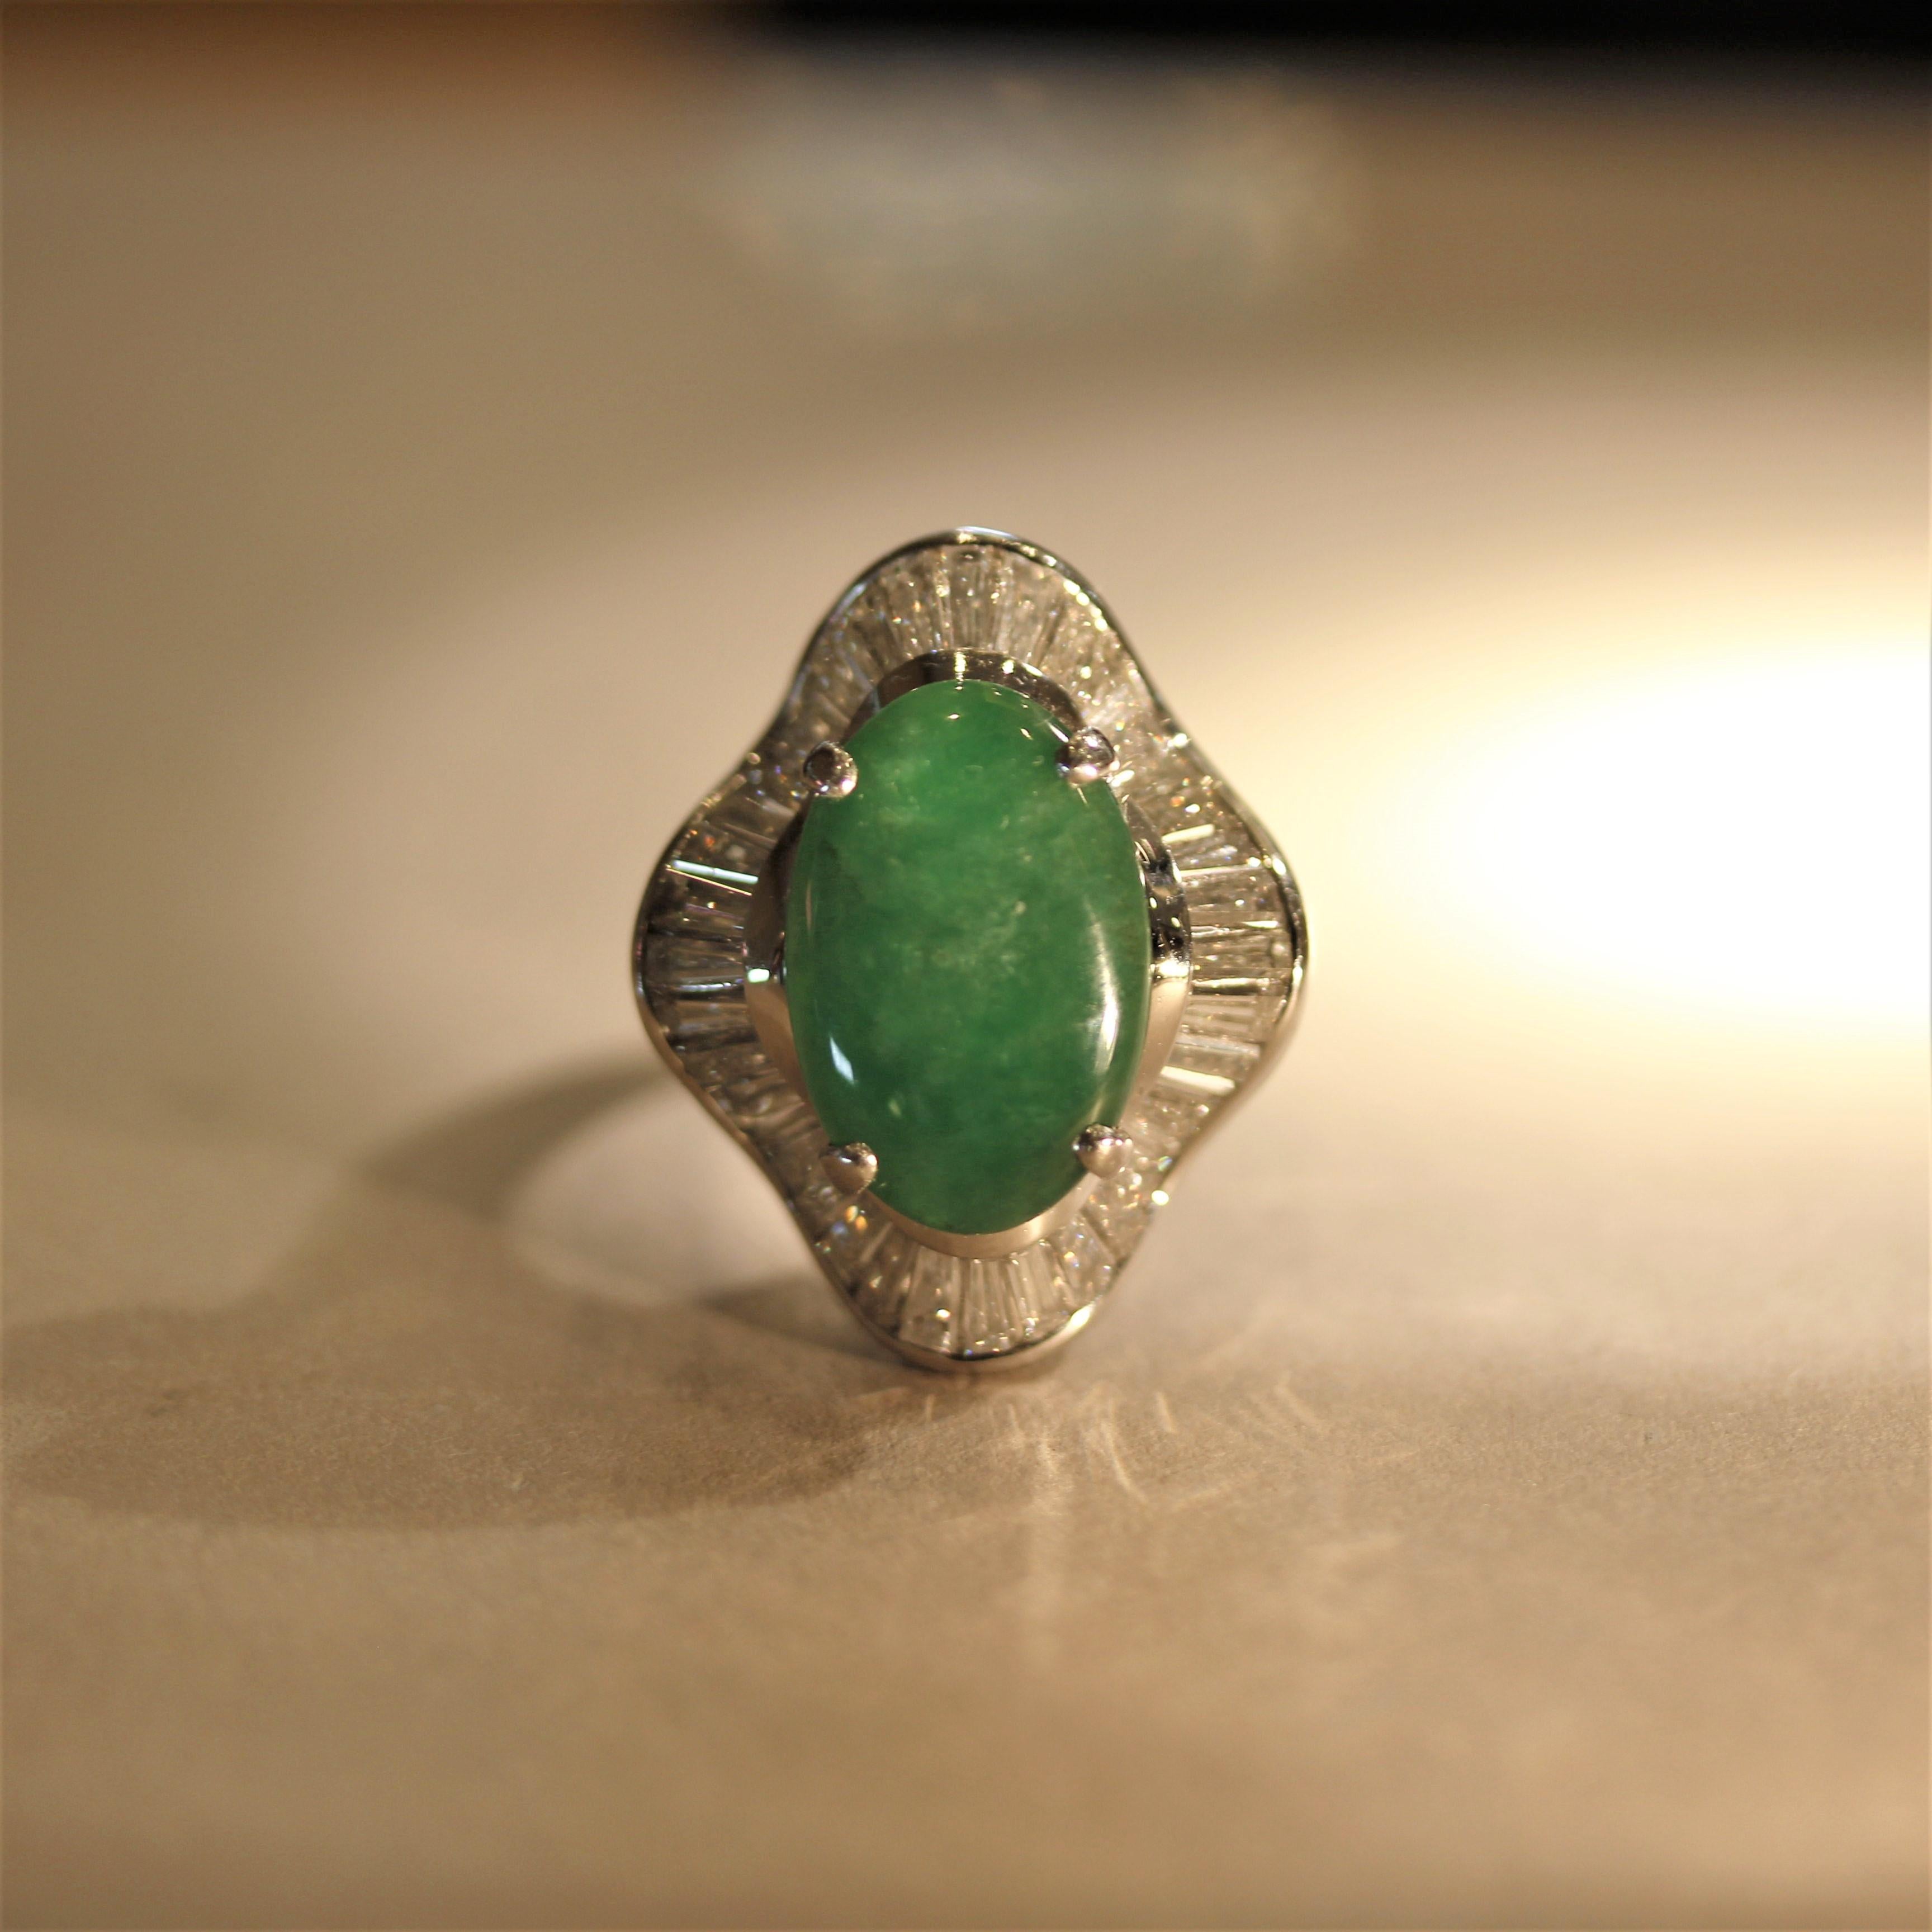 A large and impressive nature jadeite jade ring! The jade has a luscious deep green color with great luster as light rolls across the surface of the stone. It is accented by 3.02 carats of baguette-cut diamonds which are set around the jade in a